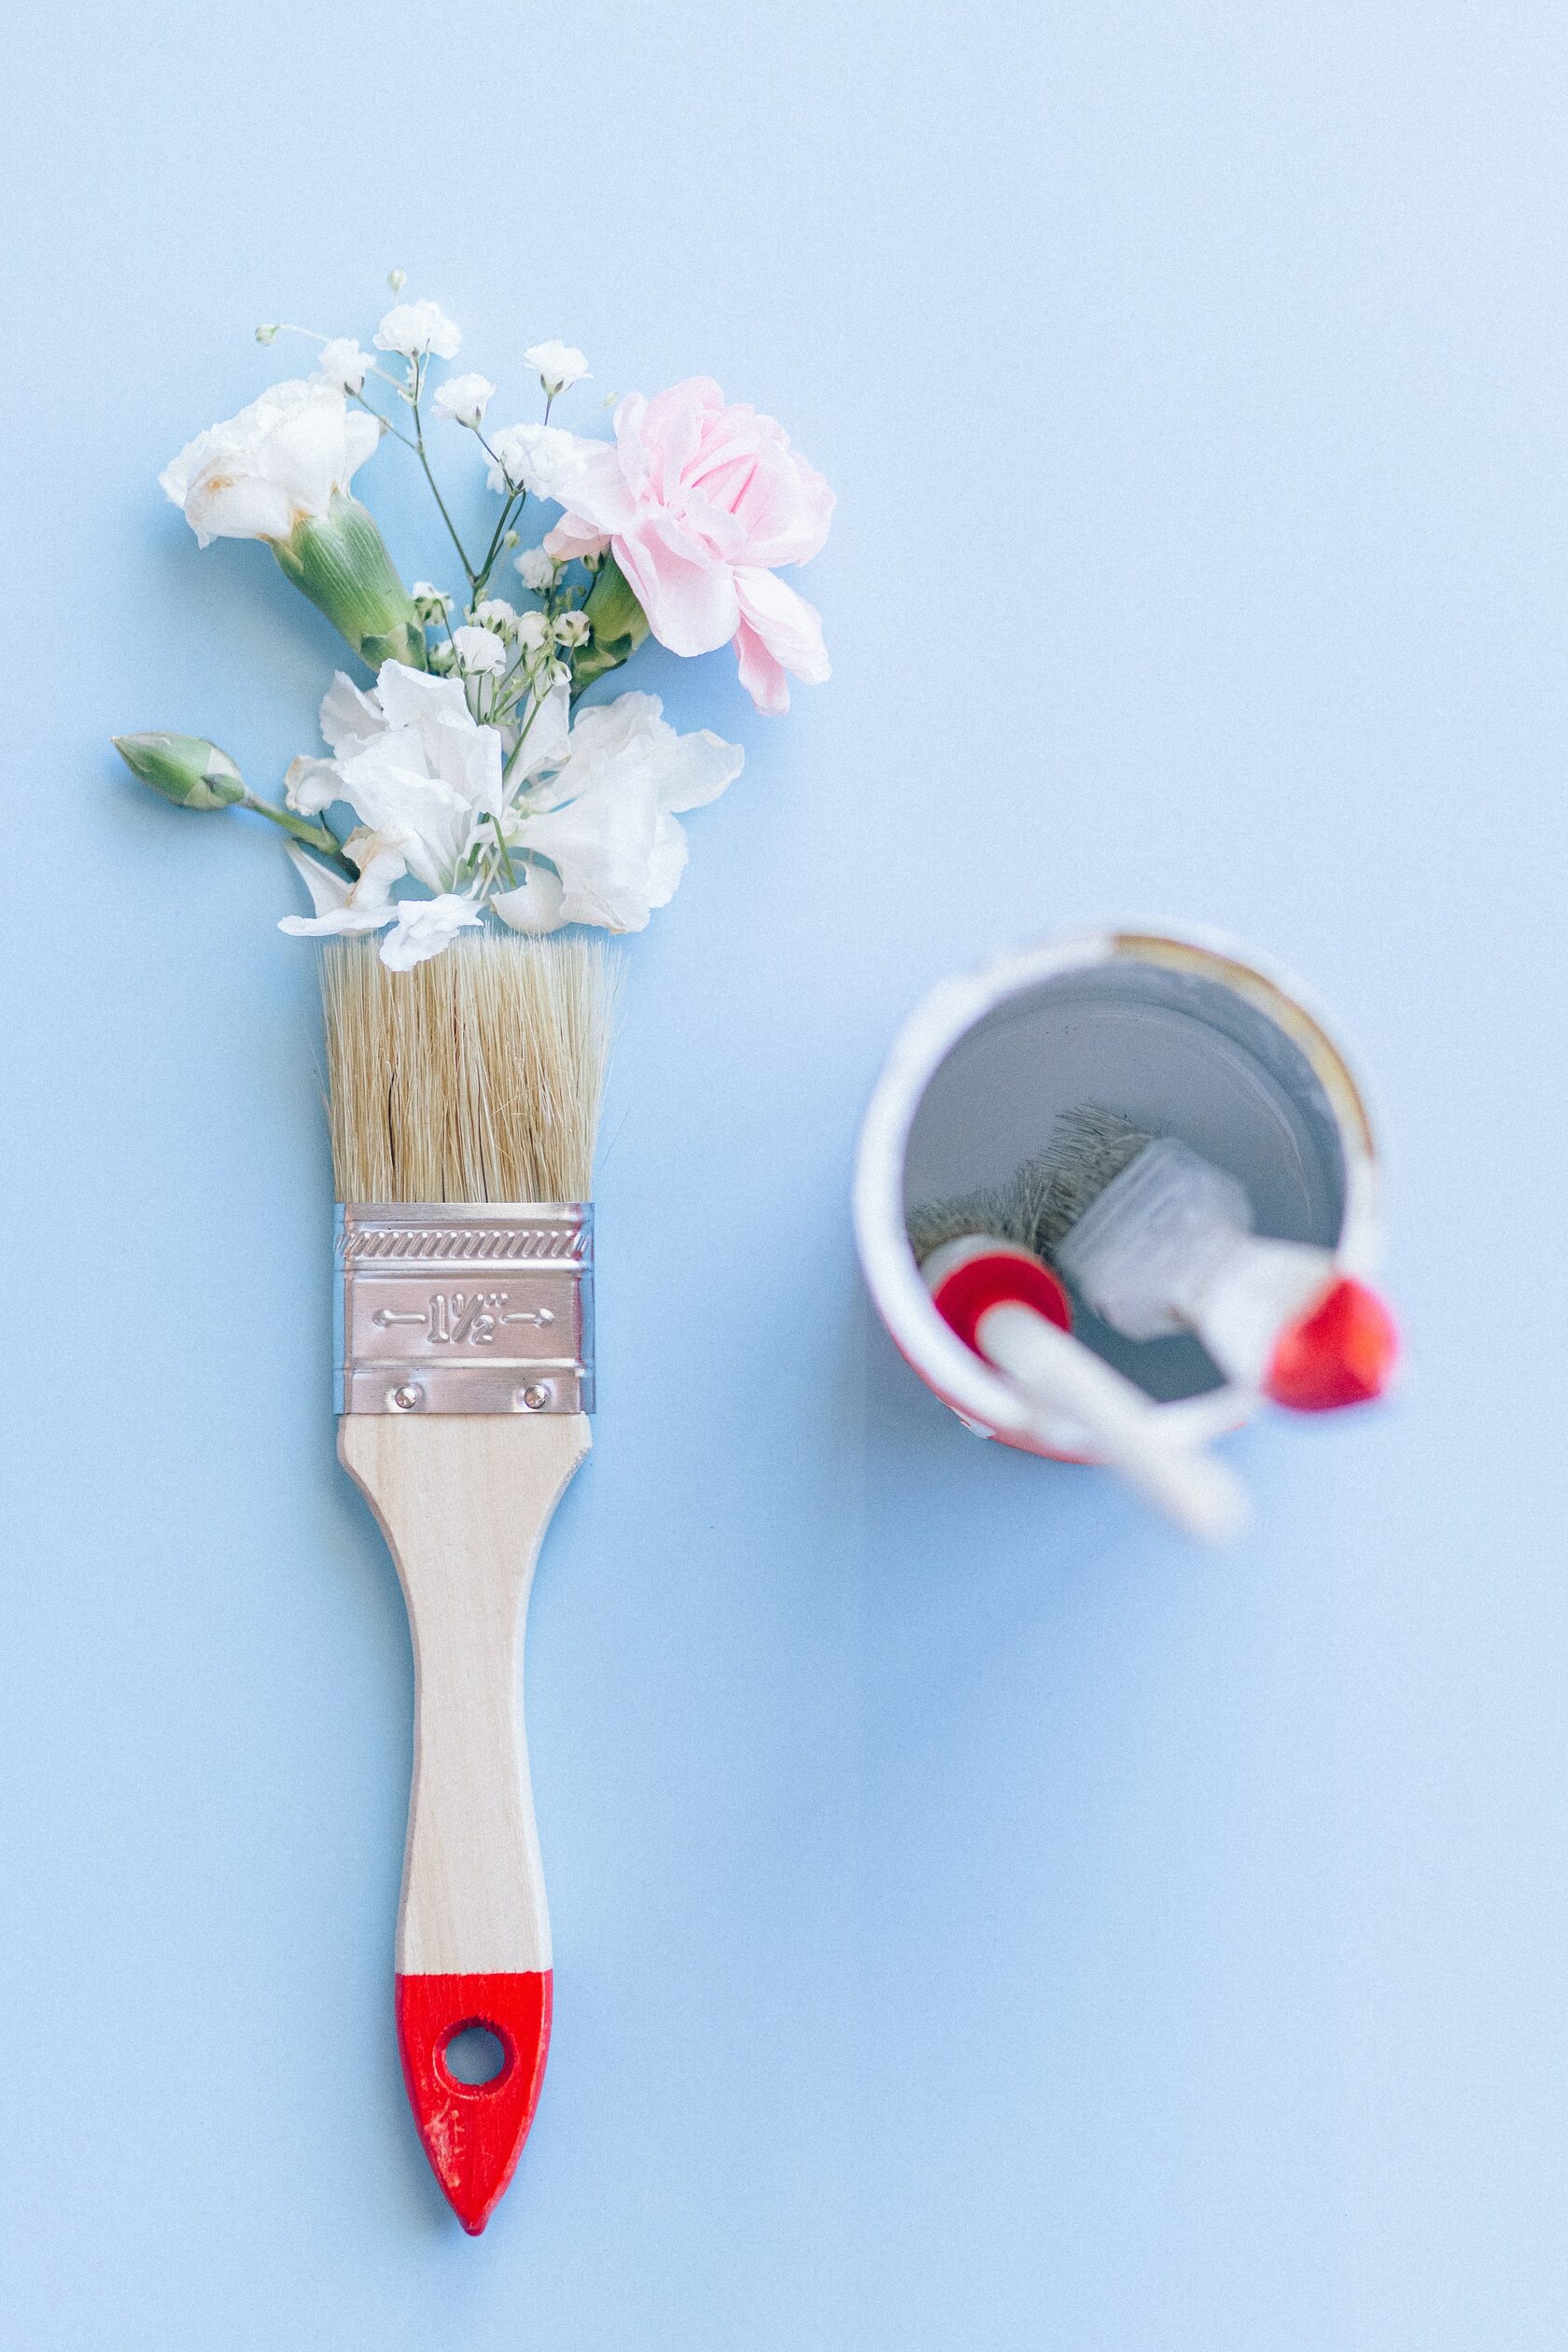 Marketing strategy to increase paintbrush sales